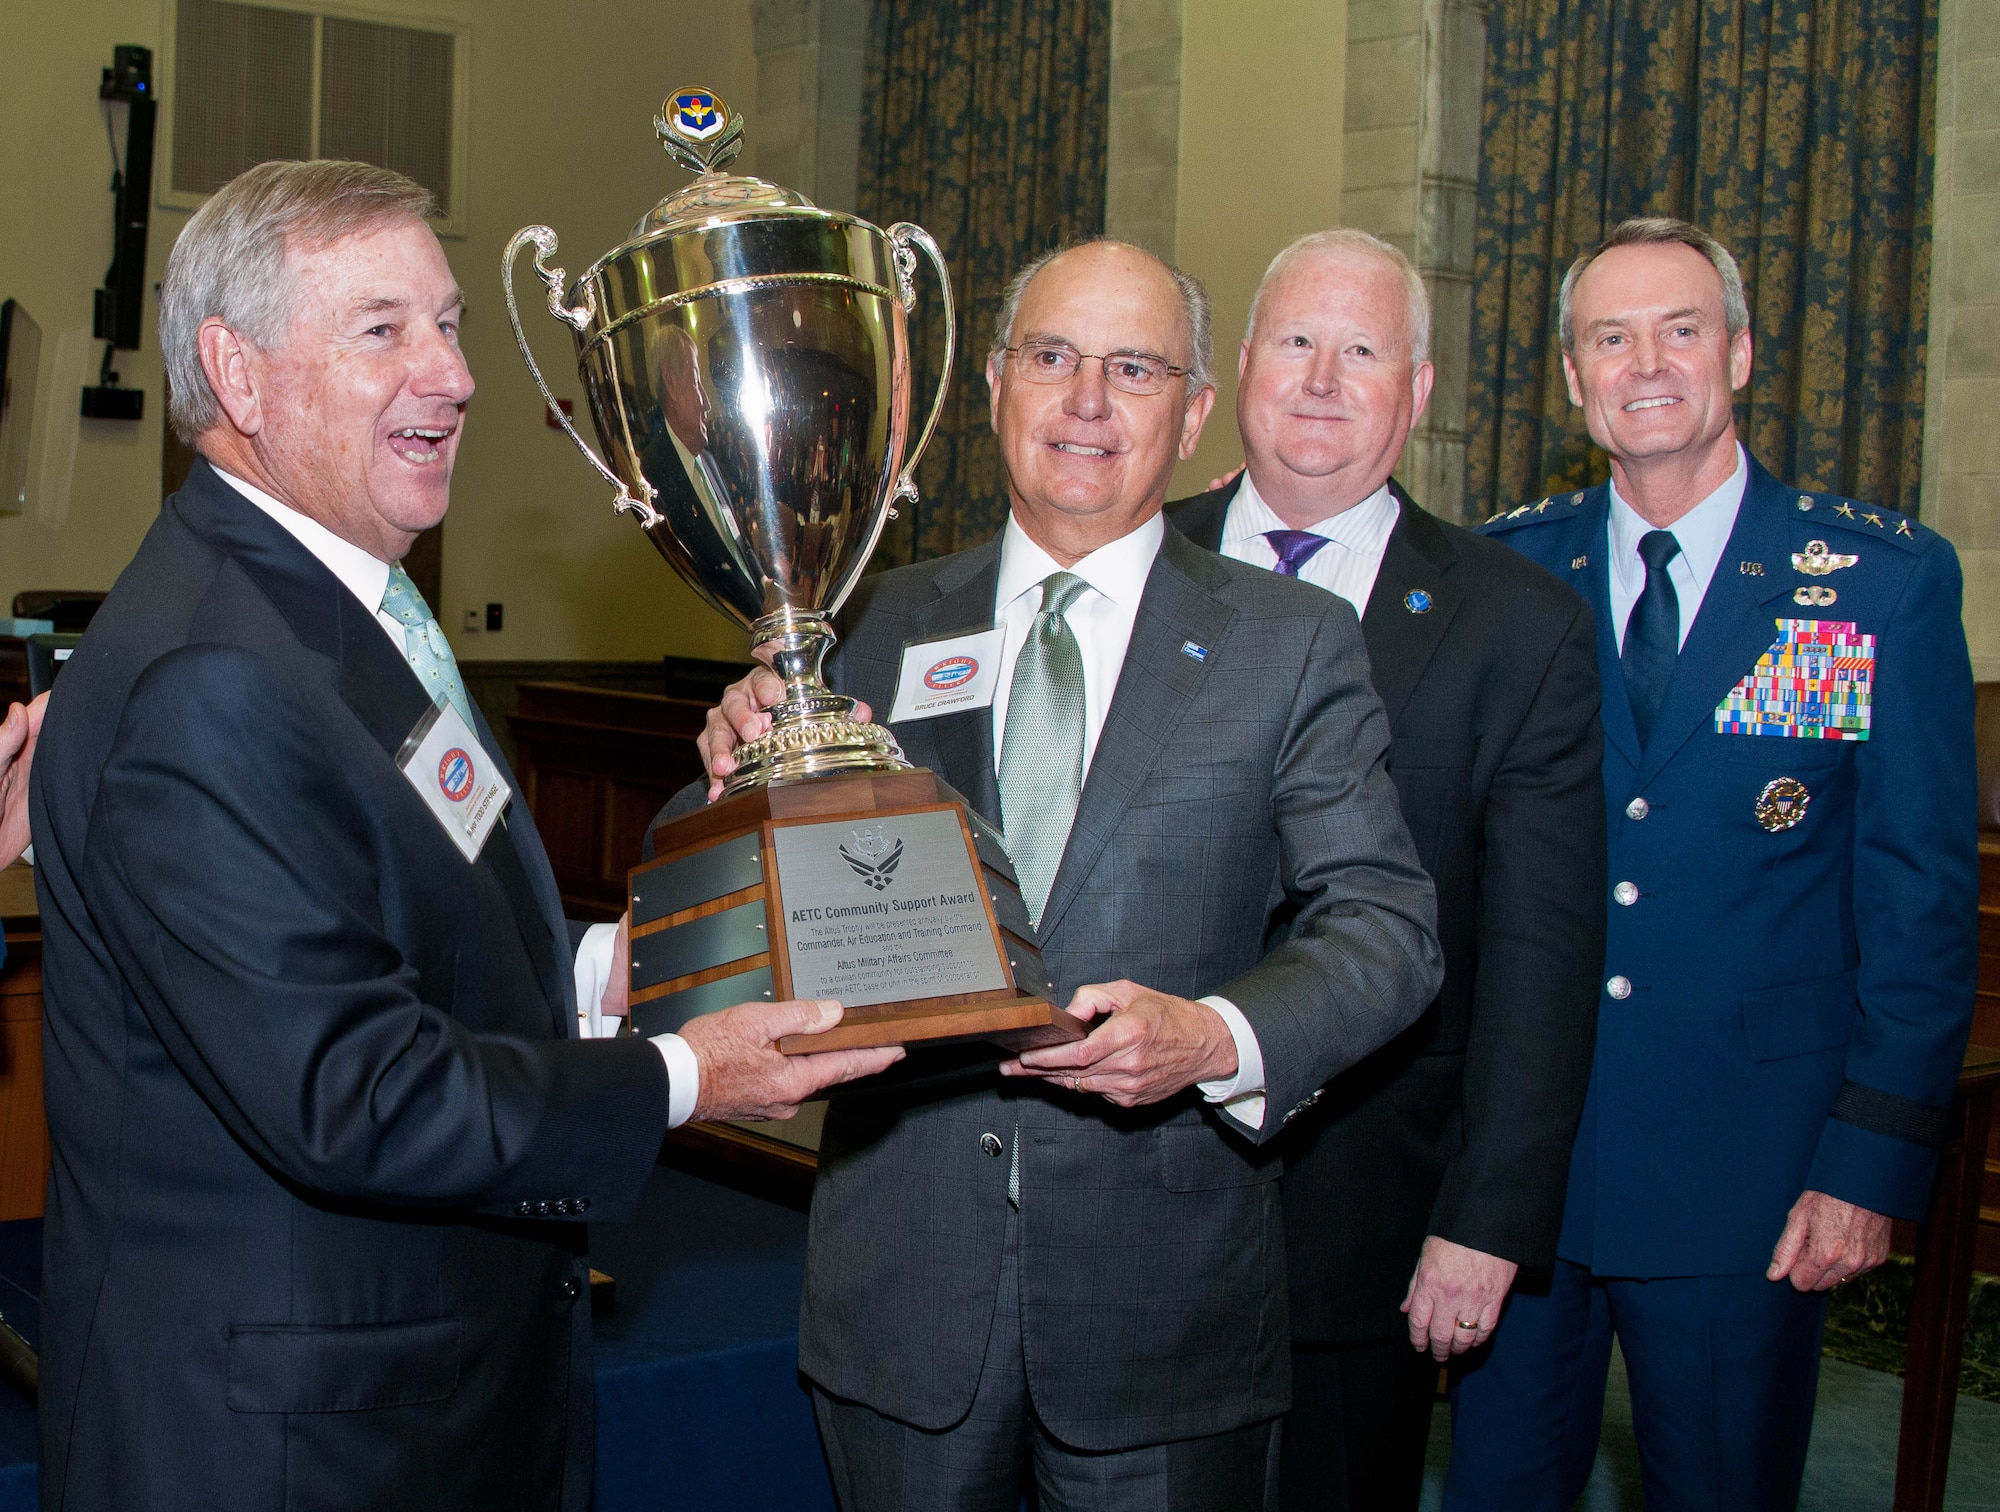 (From left) Montgomery Mayor Todd Strange and Bruce Crawford, chairman of the board of directors for the Montgomery Area Chamber of Commerce, accept the 2015 Altus Trophy on behalf of the city of Montgomery during a ceremony at the U.S. Federal Courthouse April 11, 2016, from Dr. Joe Leverett, chairman of the Altus Trophy selection committee, and Lt. Gen. Darryl Roberson, commander of Air Education and Training Command. (U.S. Air Force photo by Donna Burnett)